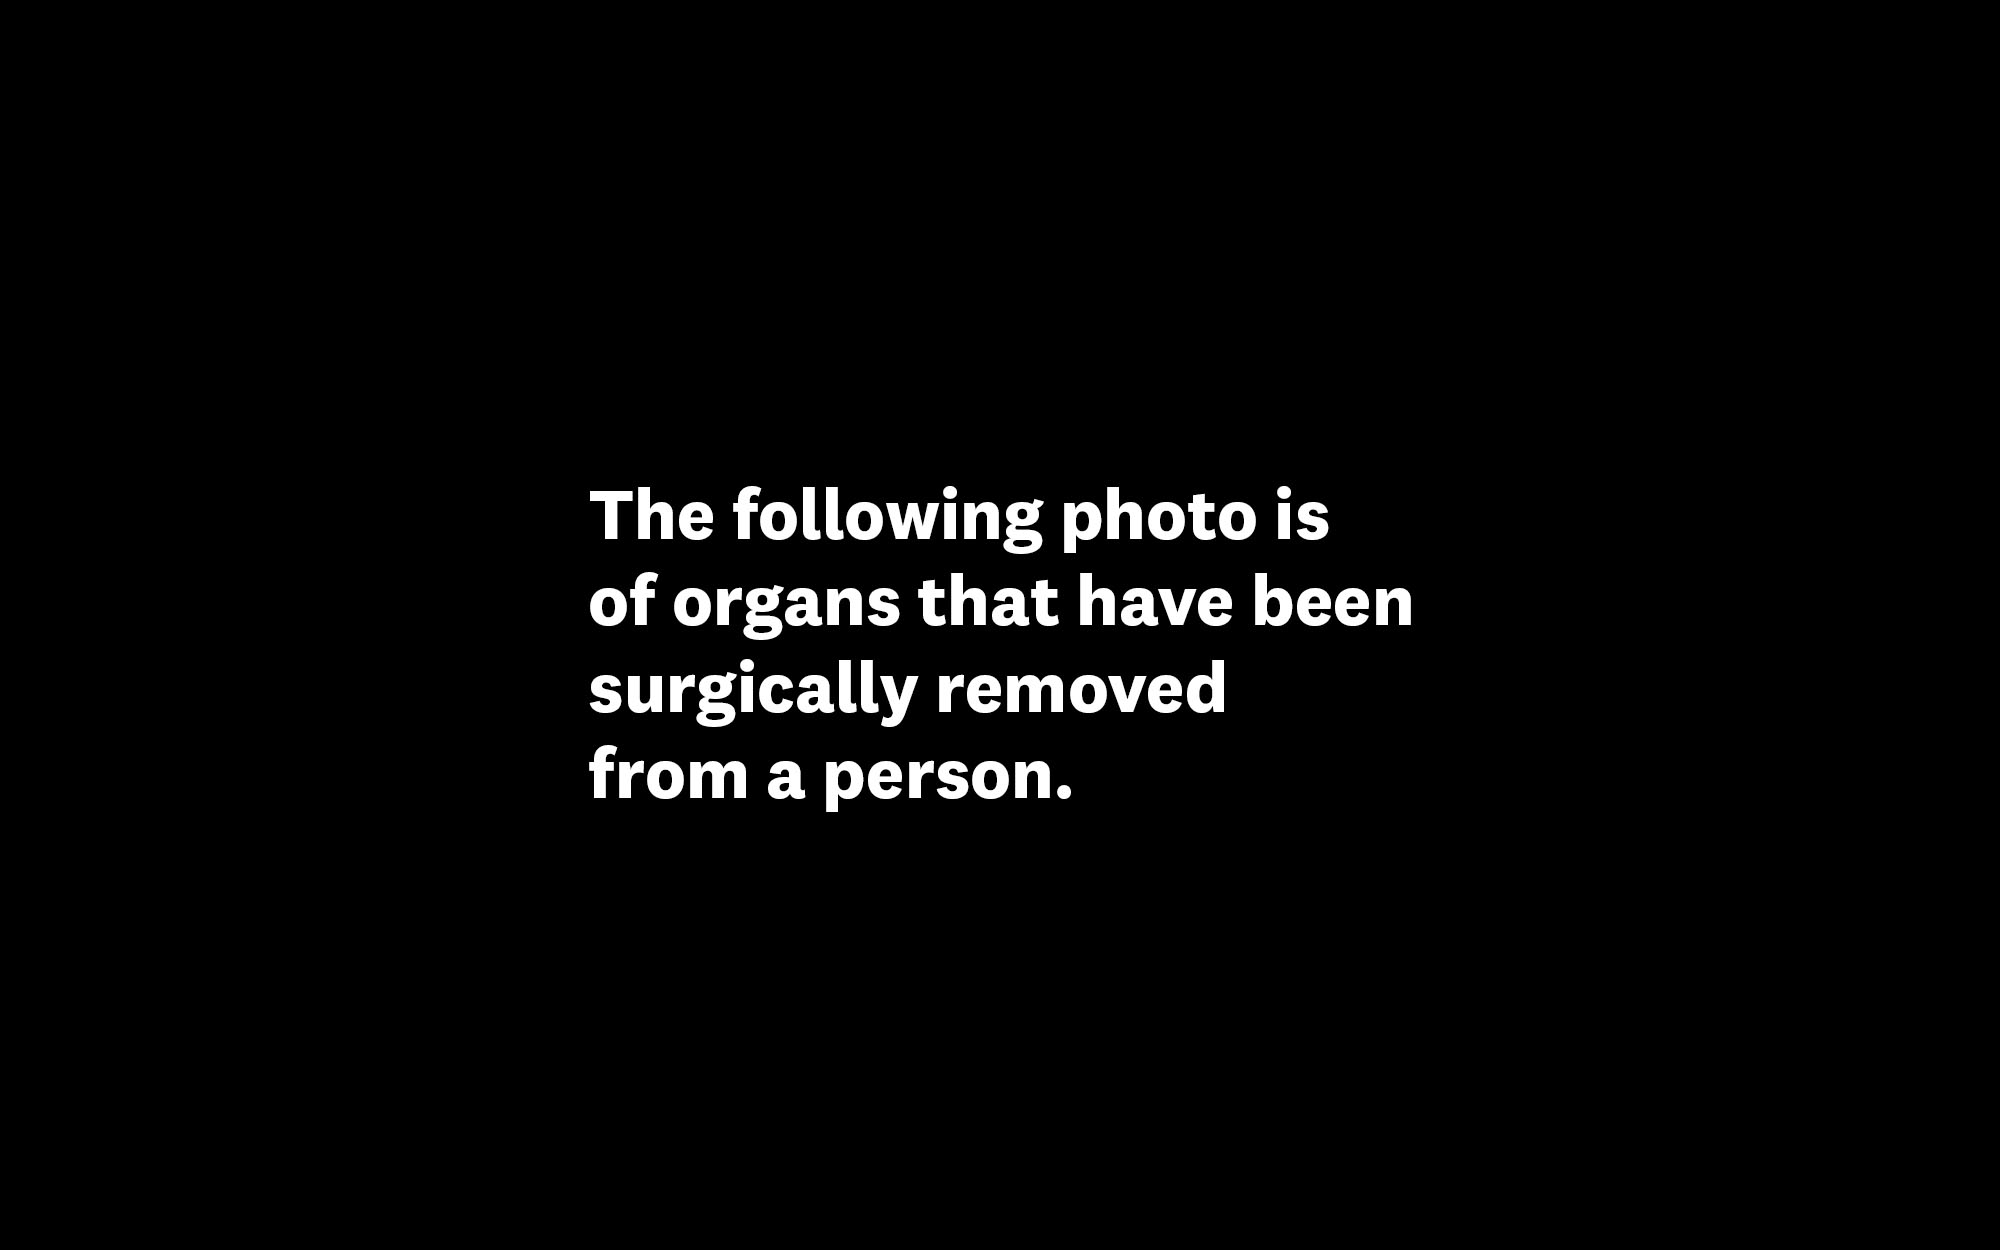 The following photo is of organs that have been surgically removed from a person.